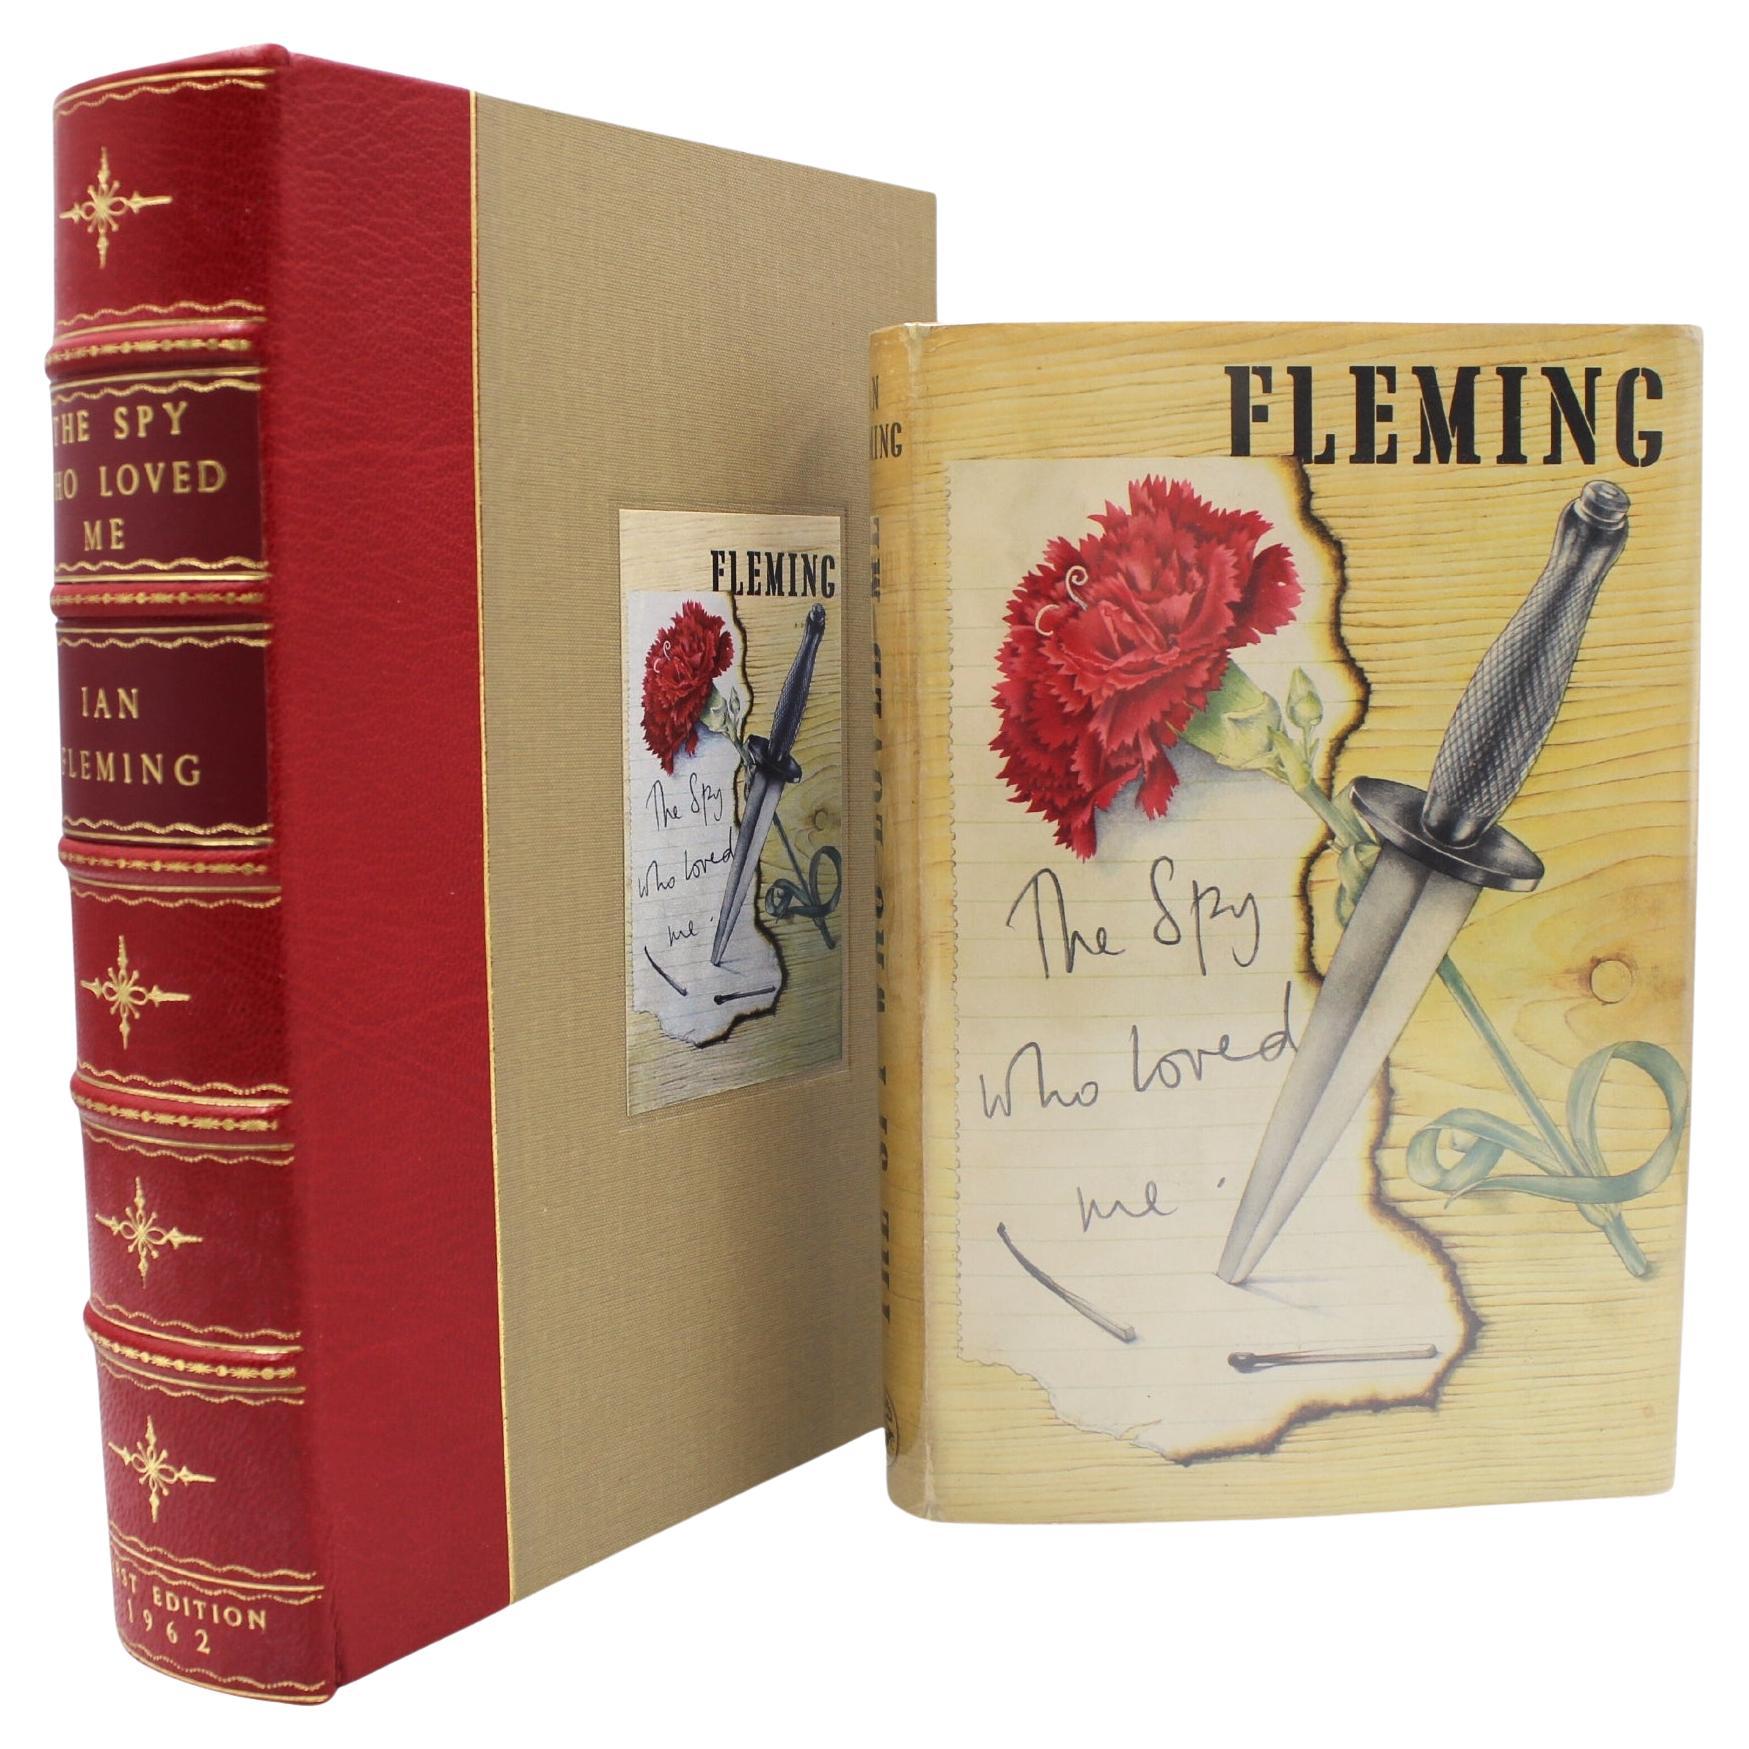 The Spy Who Loved Me by Ian Fleming, First Edition in Original Dust Jacket, 1962